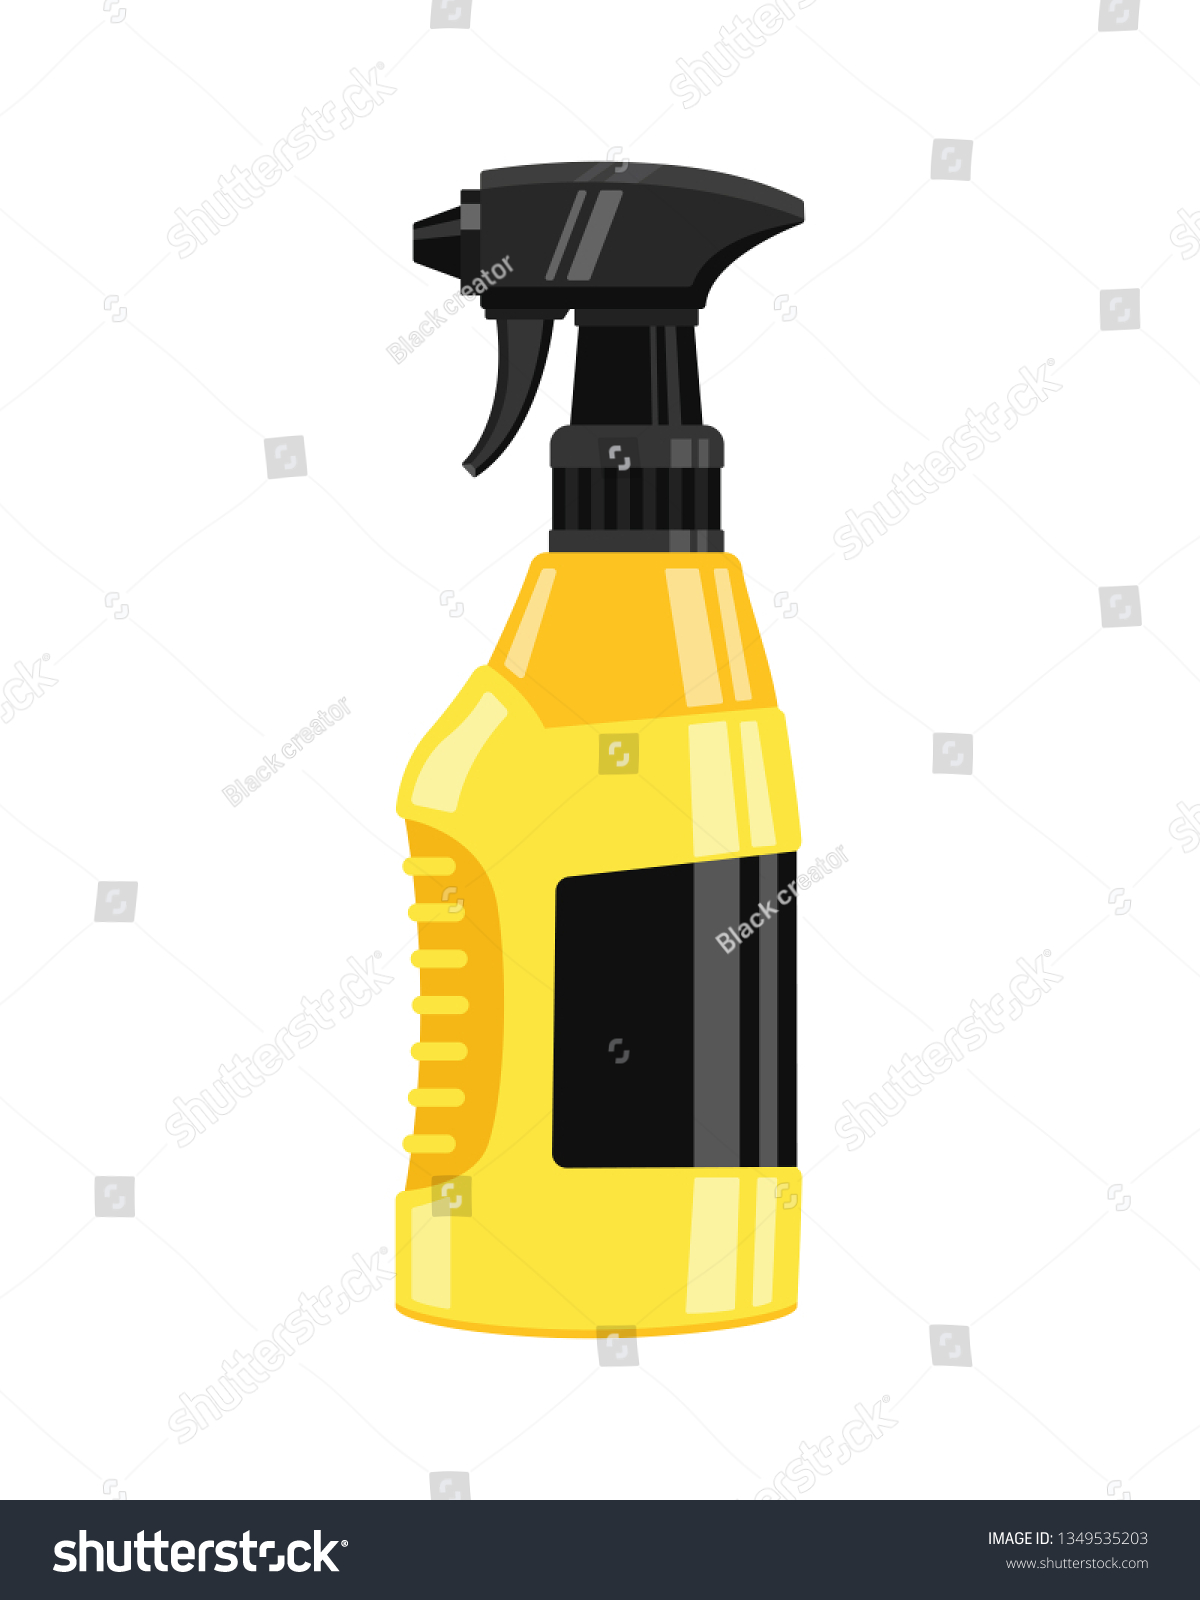 Download Yellow Sprayer Bottle Isolated Vector Stock Vector Royalty Free 1349535203 PSD Mockup Templates